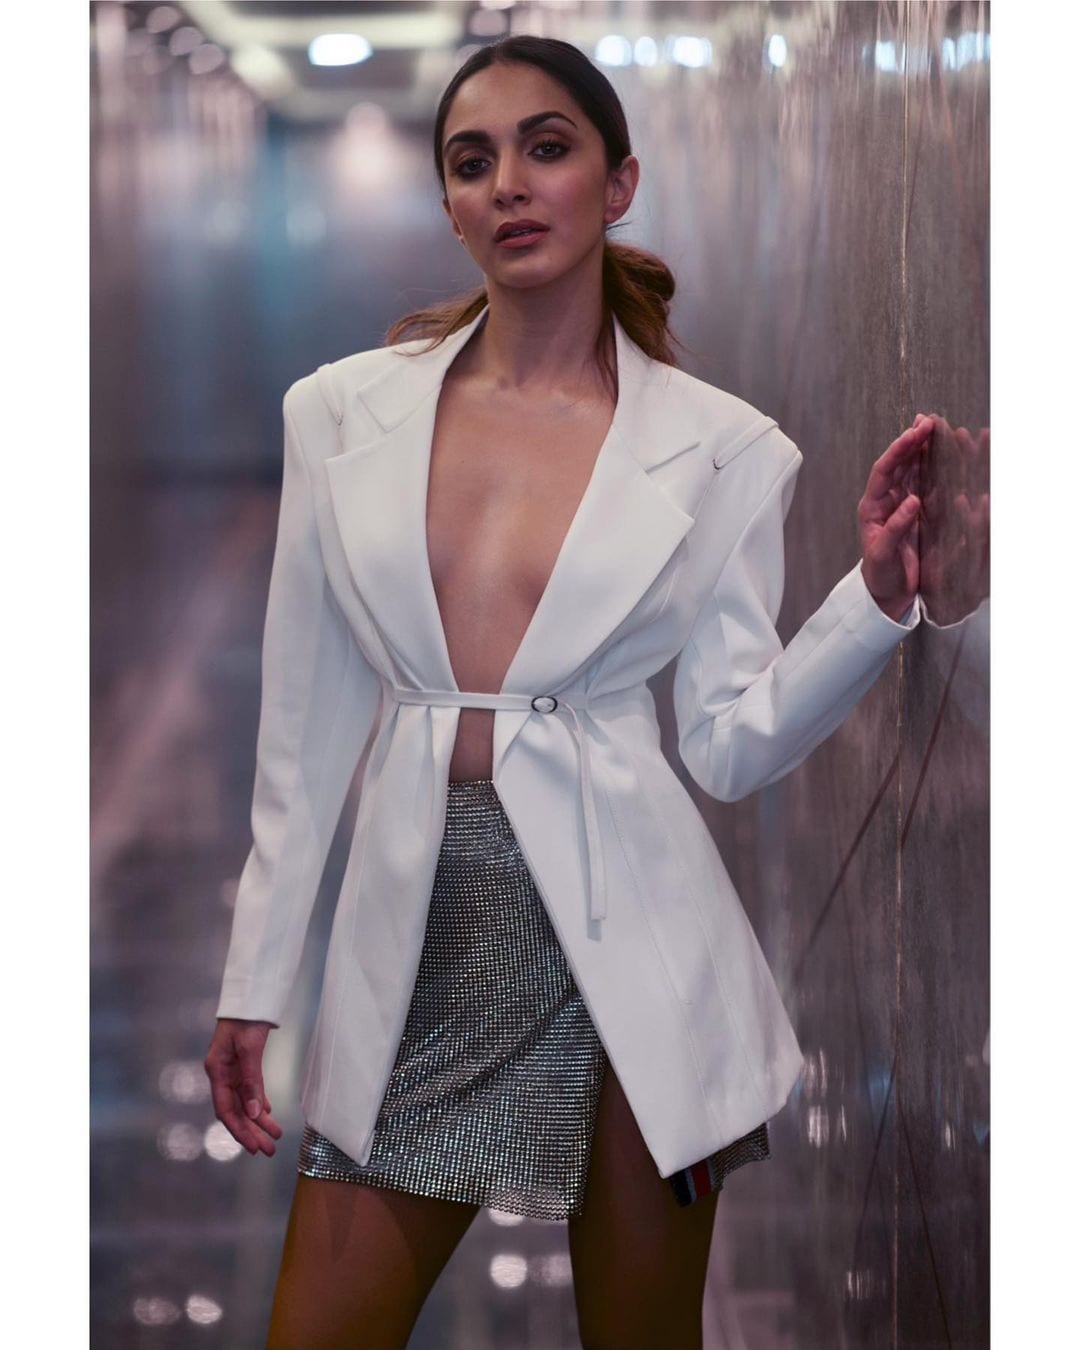 Kiara Advani looked chic and sexy in a Jacquemus white jacket paired with a Monisha Jaising mini skirt.